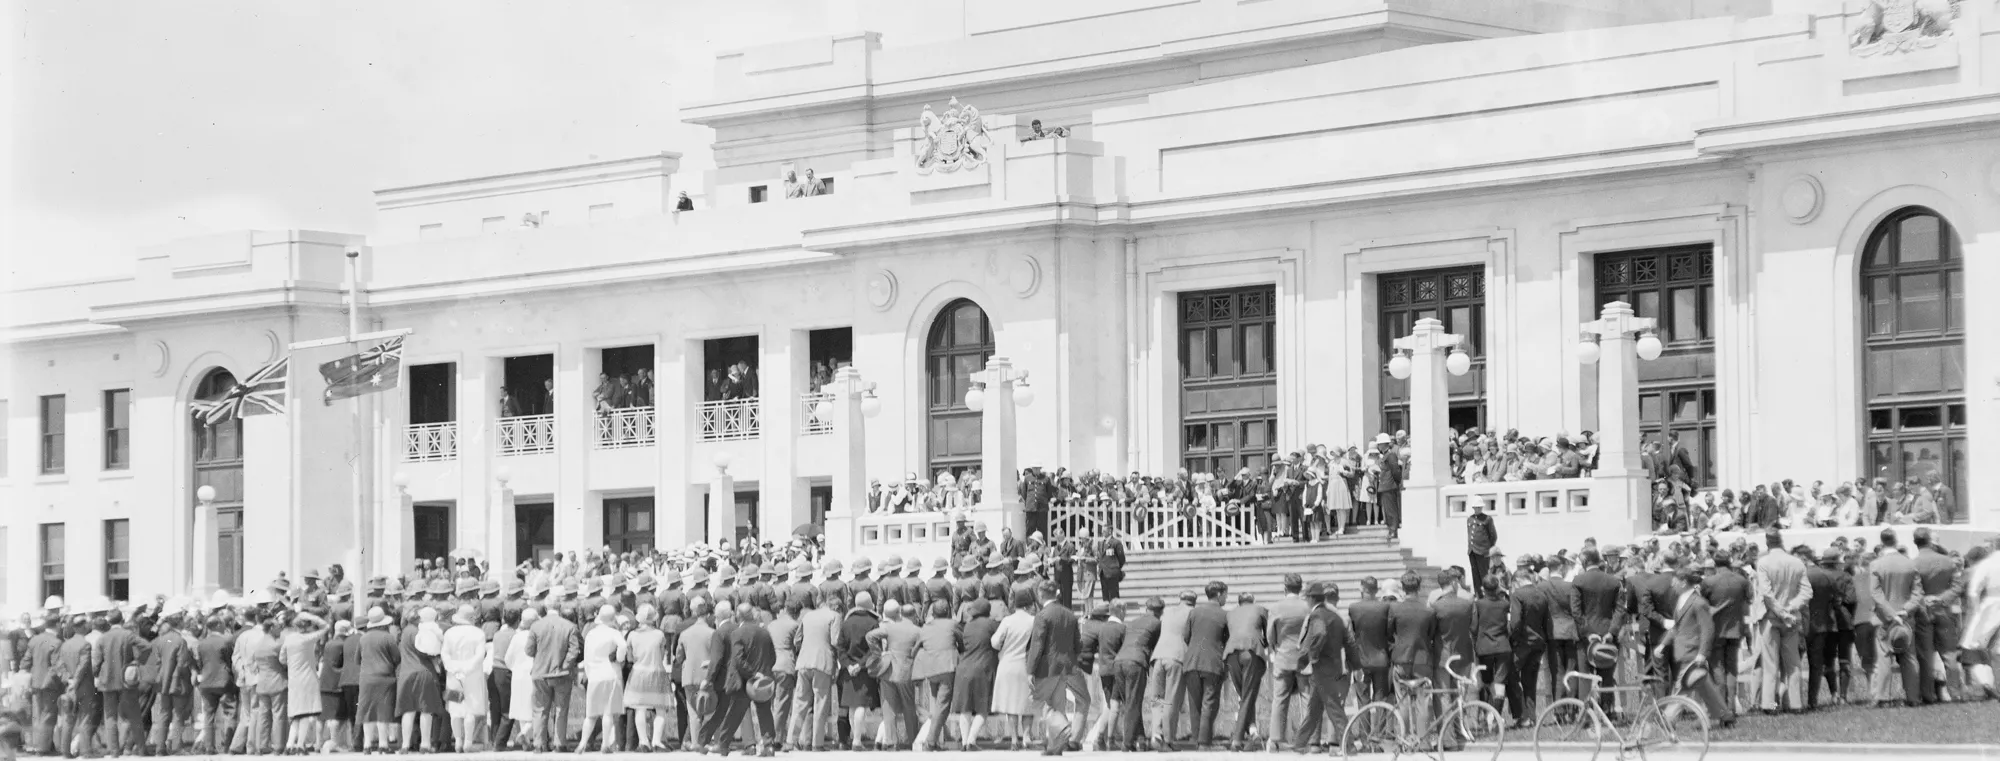 Black and white image of the front of Old Parliament House with a crowd of people of gathered at the foot of the stairs. The building is white with columns and an Australian flag flies at the top. 